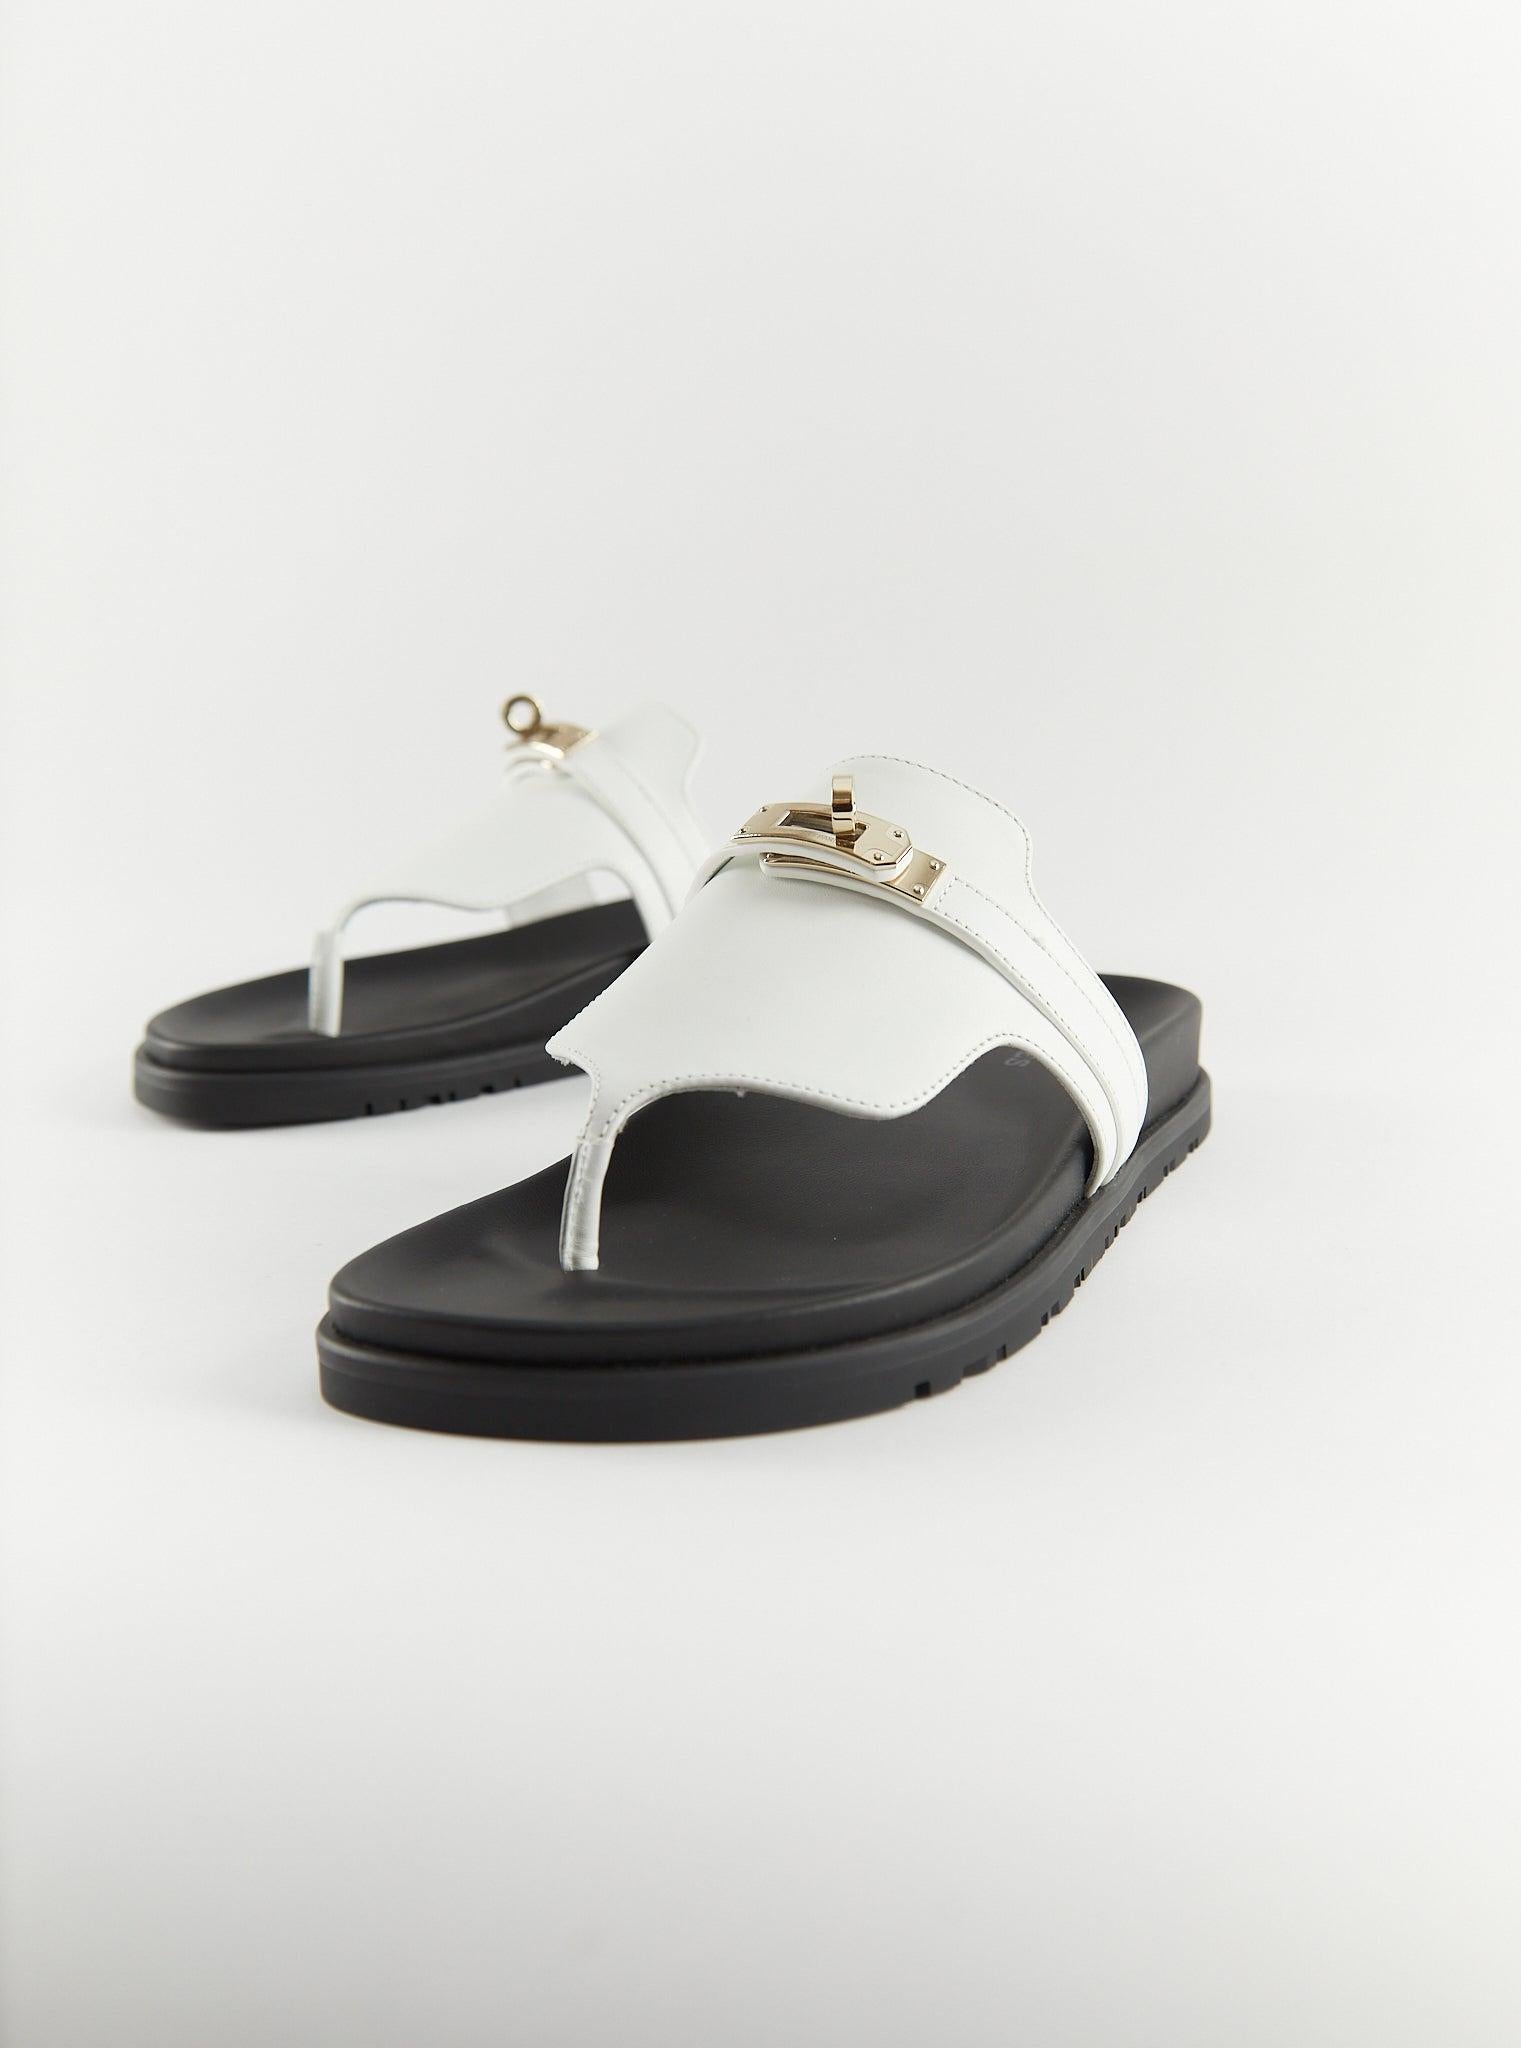 Hermès Empire Sandals in White

Techno-sandal in calfskin with anatomical sole and iconic permabrass plated Kelly buckle

Made in Italy 

Accompanied by: Hermès box, dust bags and ribbon

Size 37